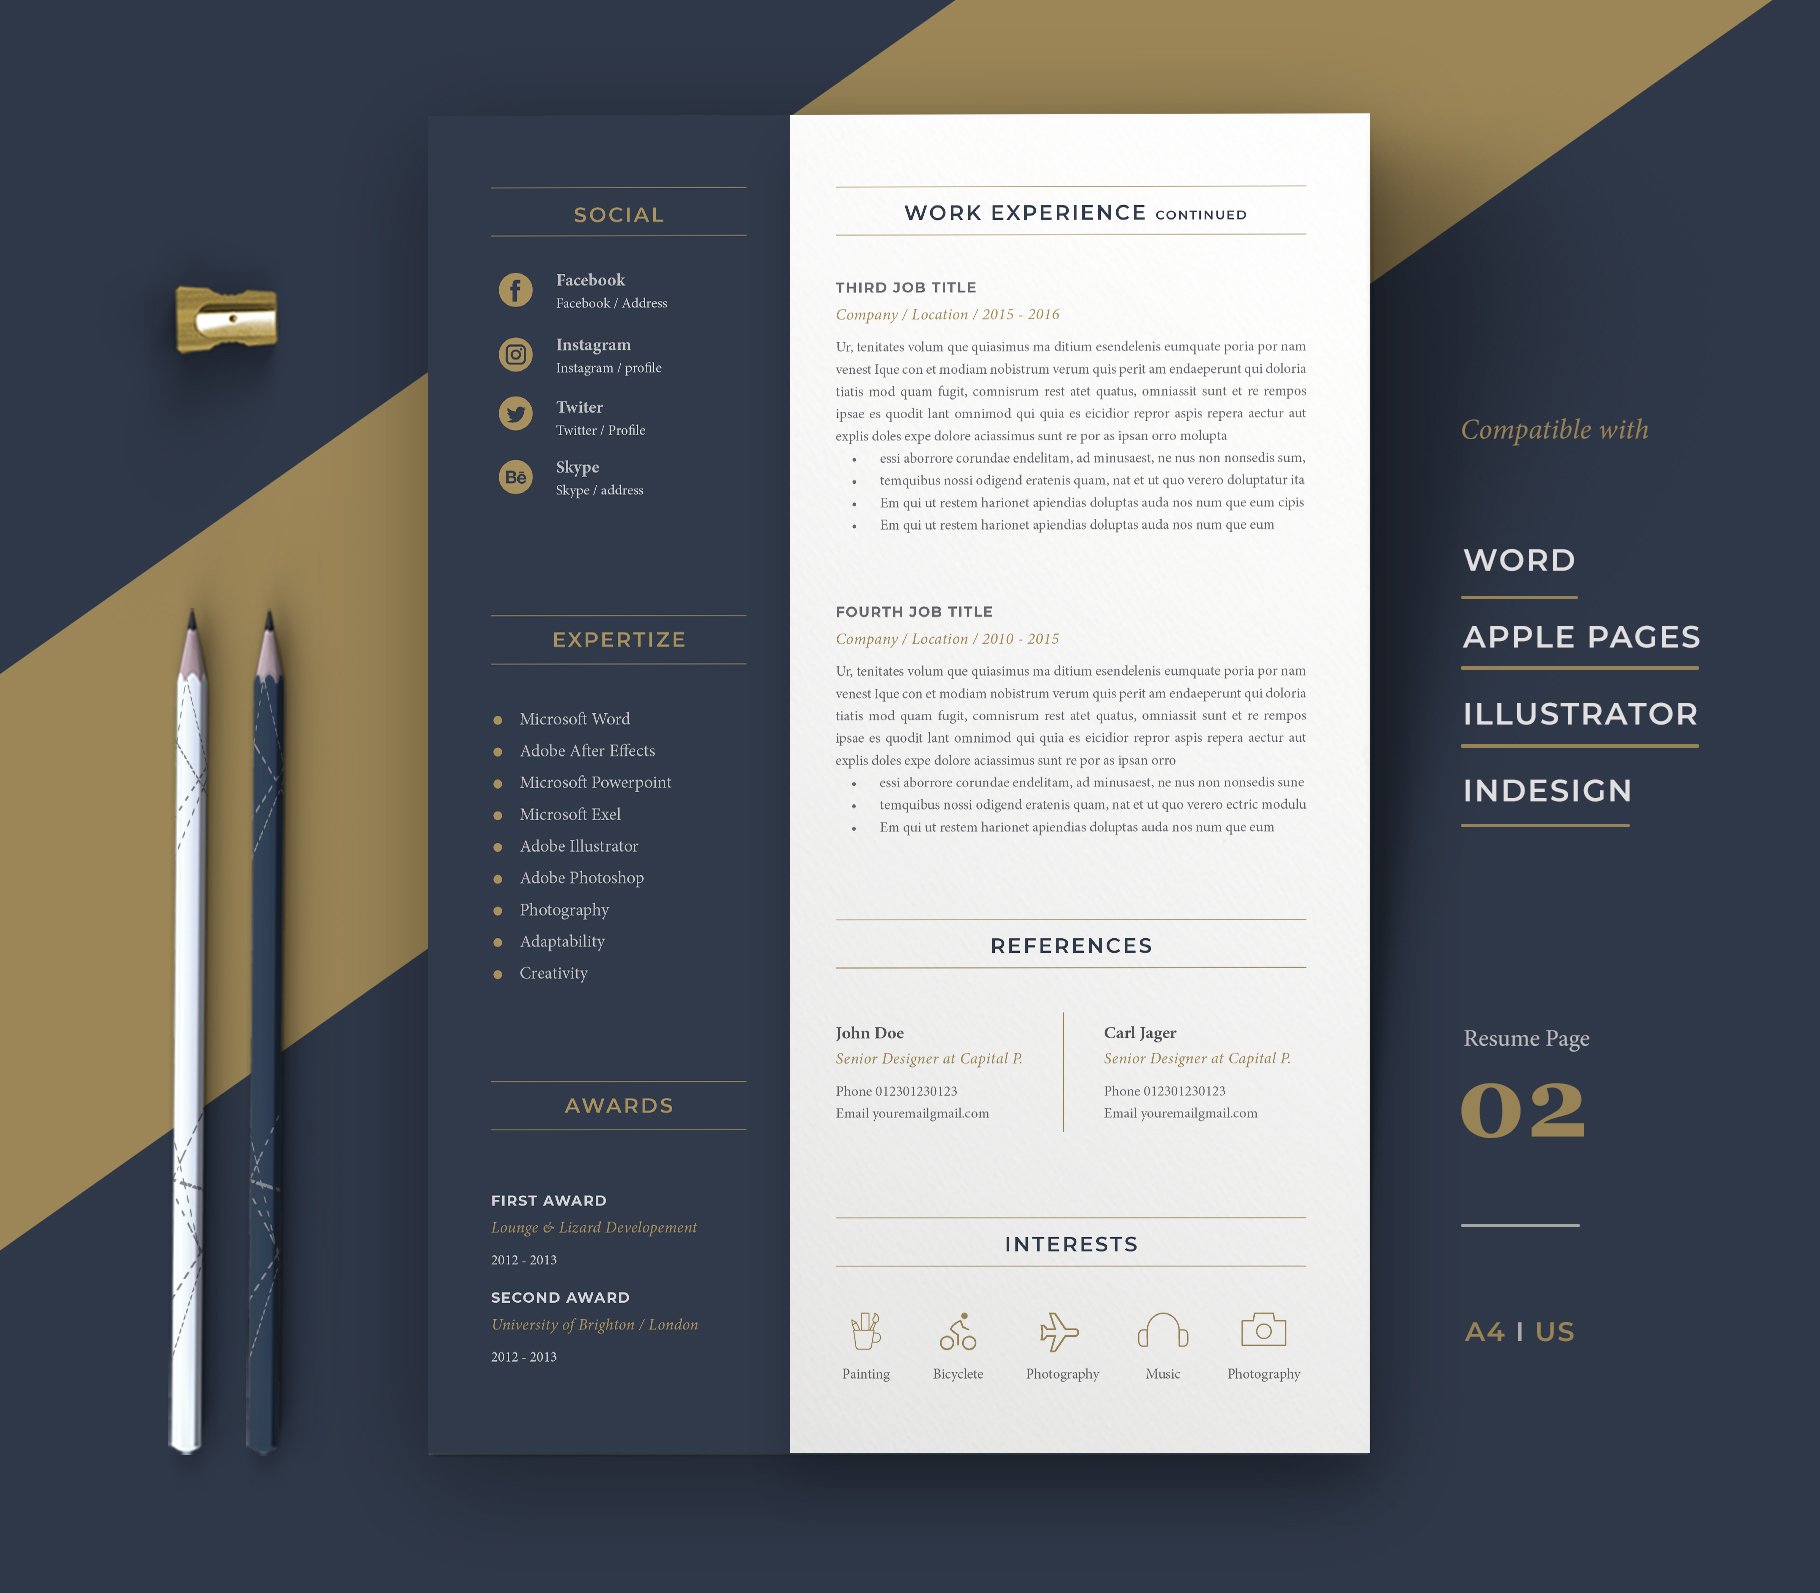 Professional resume template with a blue and gold color scheme.